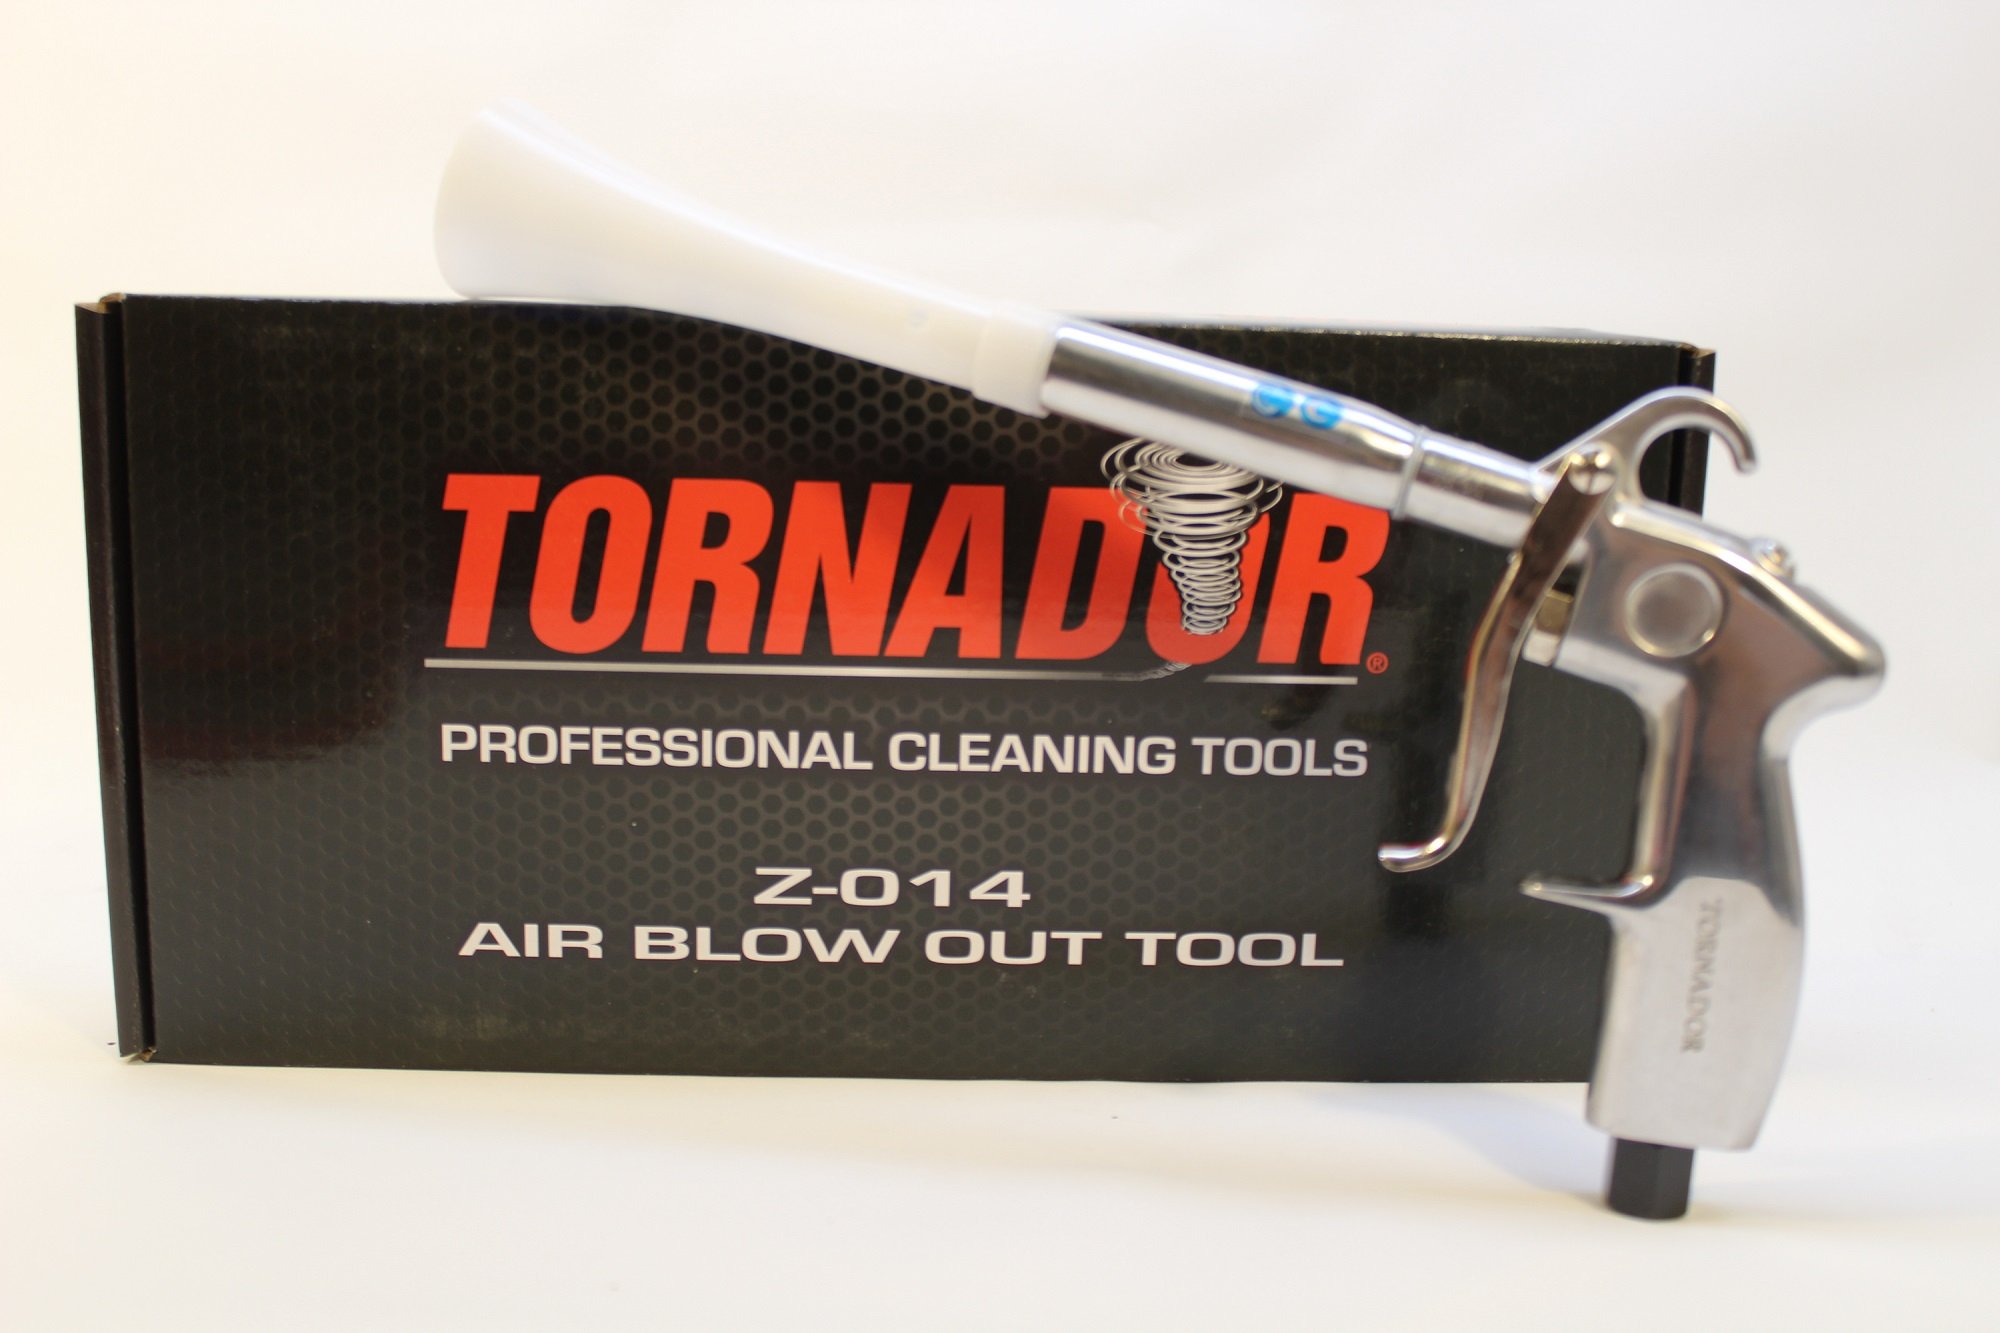 Tornador Blow Out Tool, Air Blow Out Tool